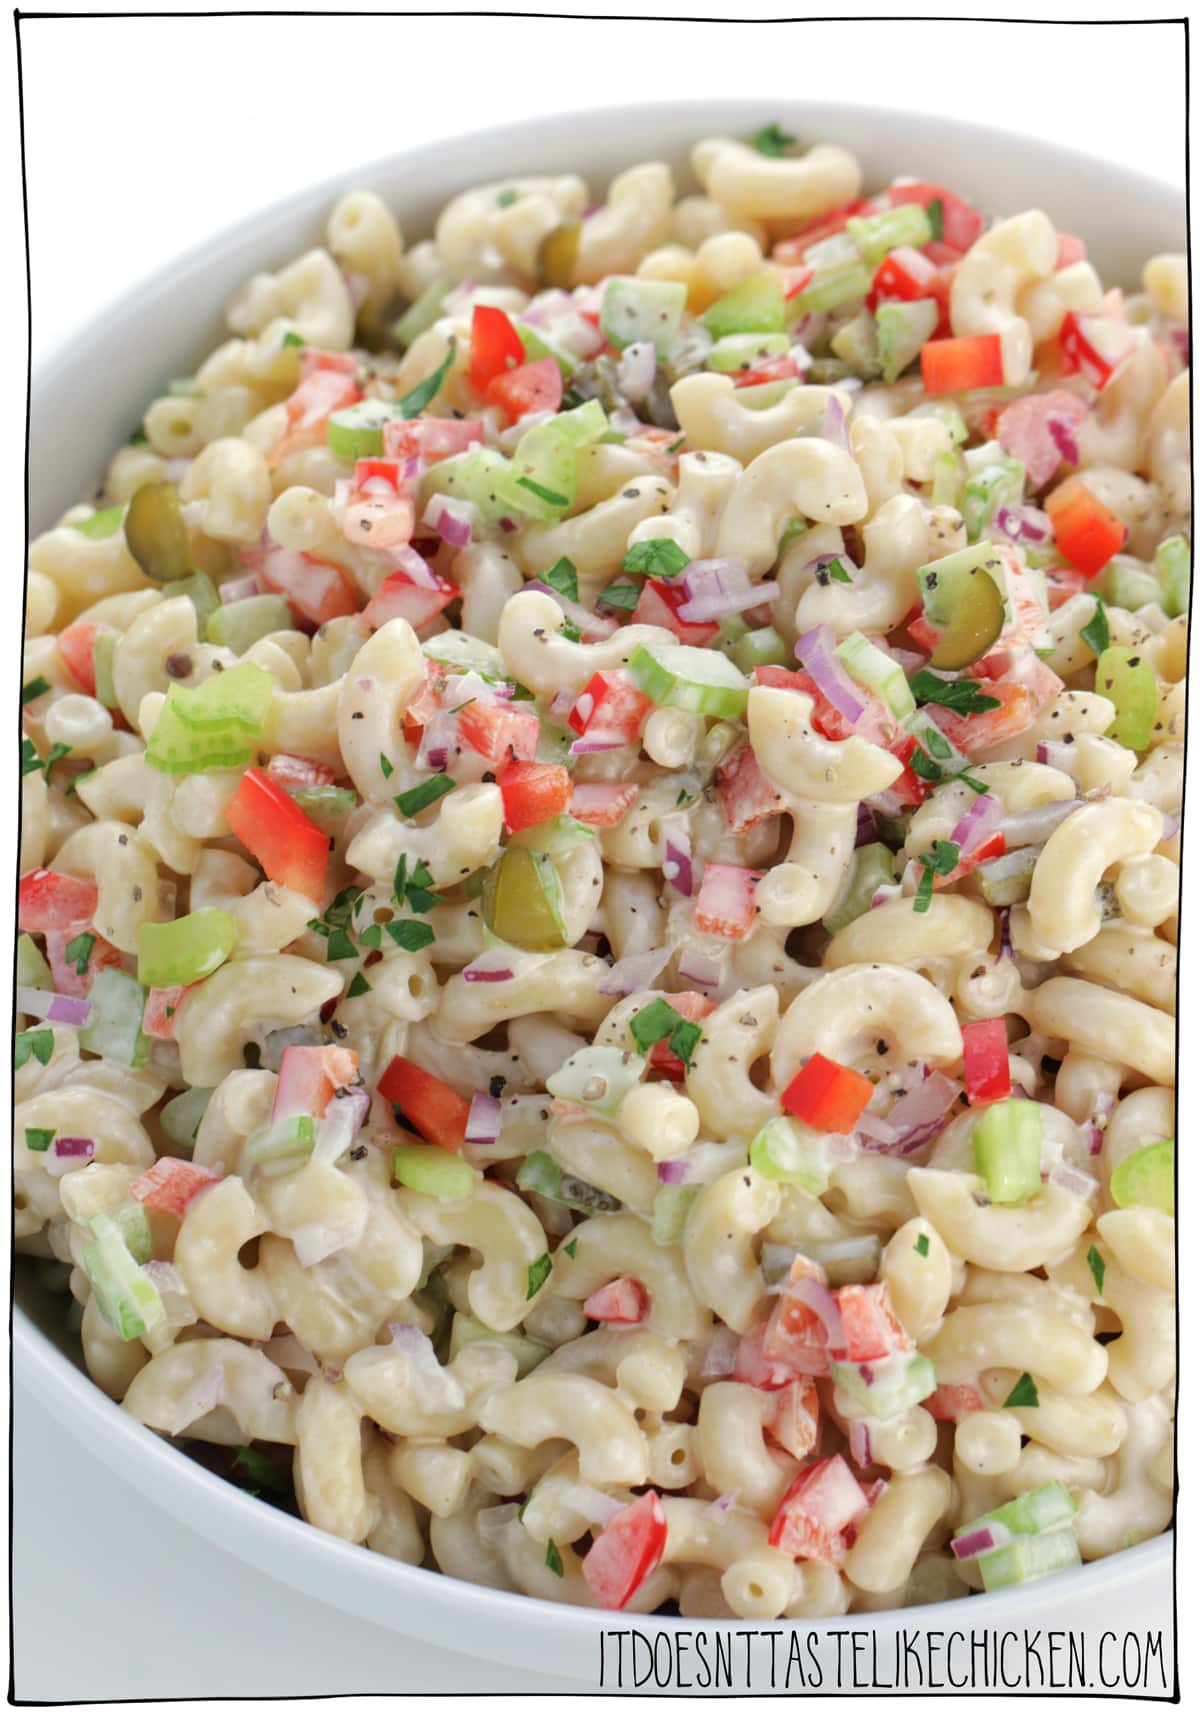 Easy Vegan Macaroni Salad! 10 ingredients and 20 minutes to make, this pasta salad is the perfect side dish for any BBQ, picnic, or potluck. Gluten-free and oil-free options. #itdoesnttastelikechicken #veganrecipes